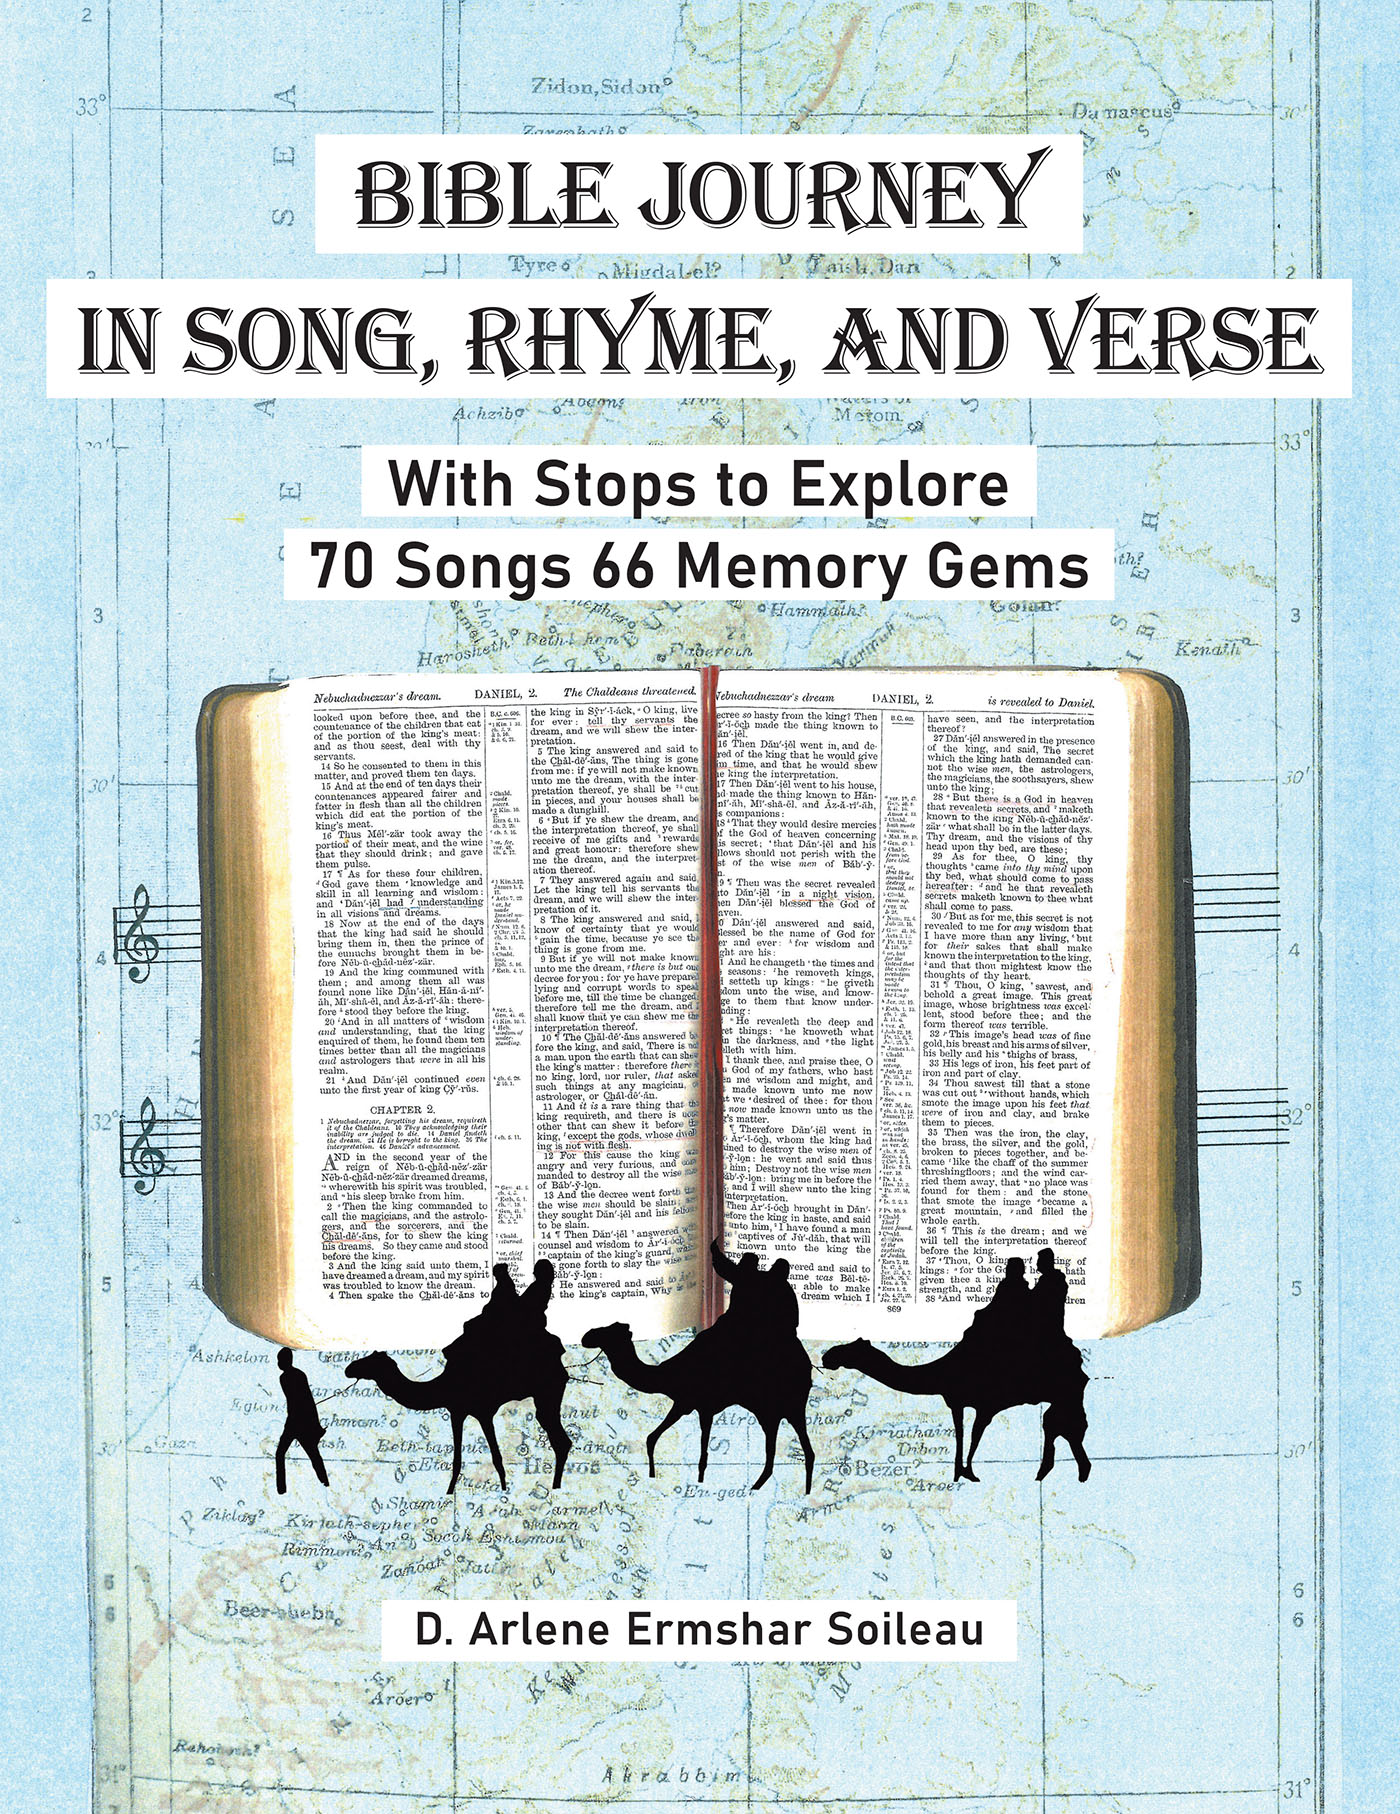 D. Arlene Ermshar’s Newly Released "Bible Journey in Song, Rhyme and Verse" is a Creative Resource for Learning Bible Content